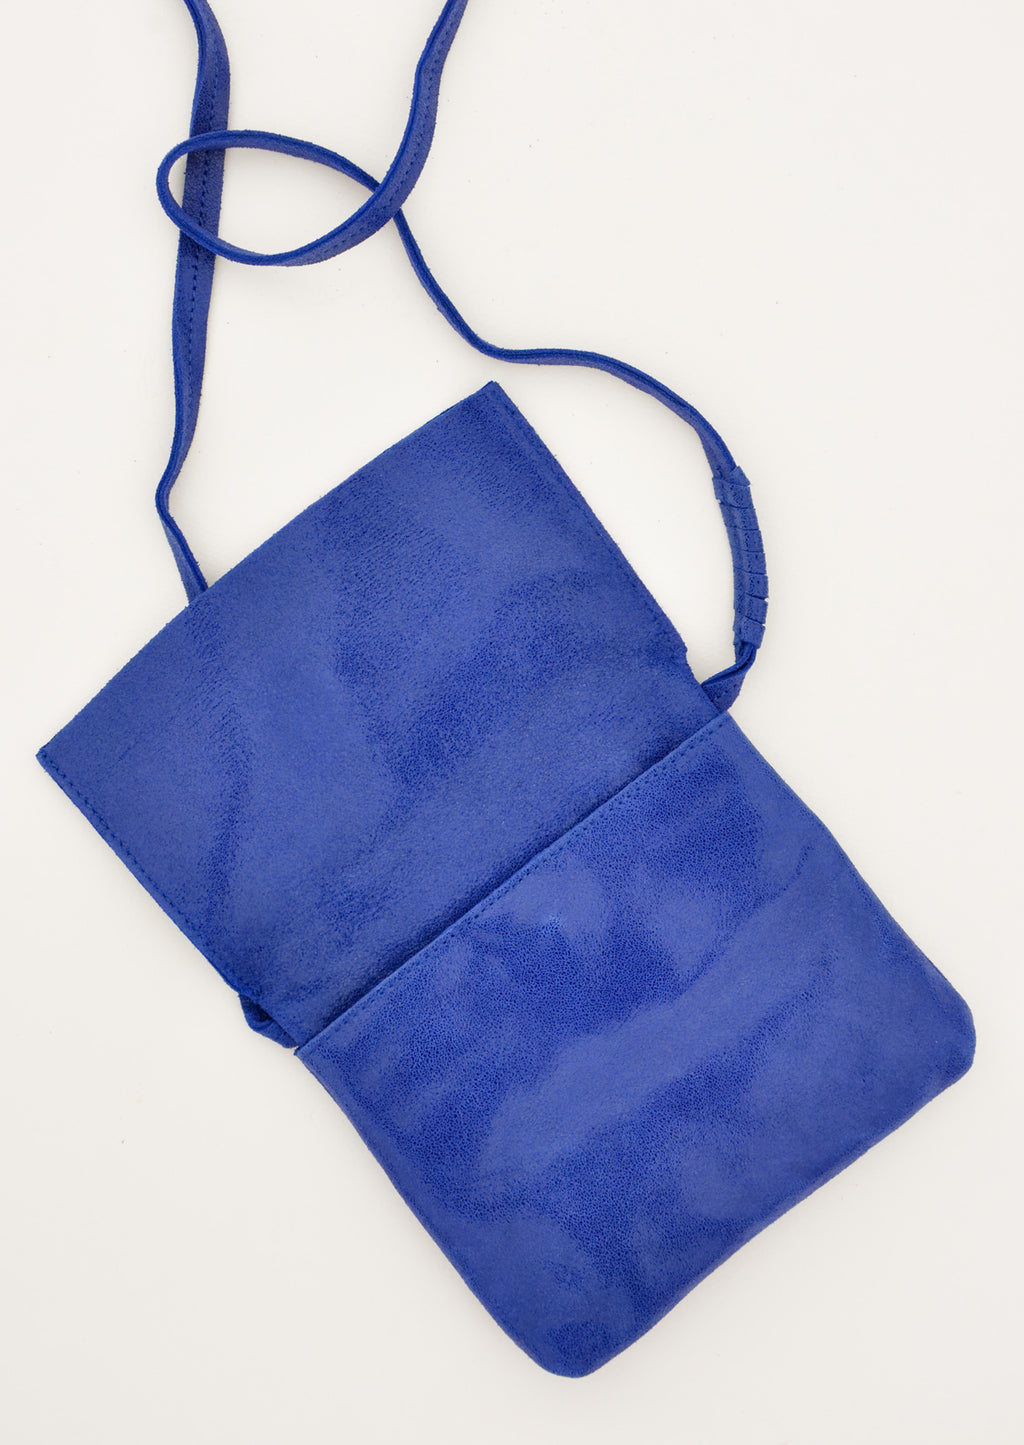 5: Bright blue cross body leather bag shown with flap upturned.